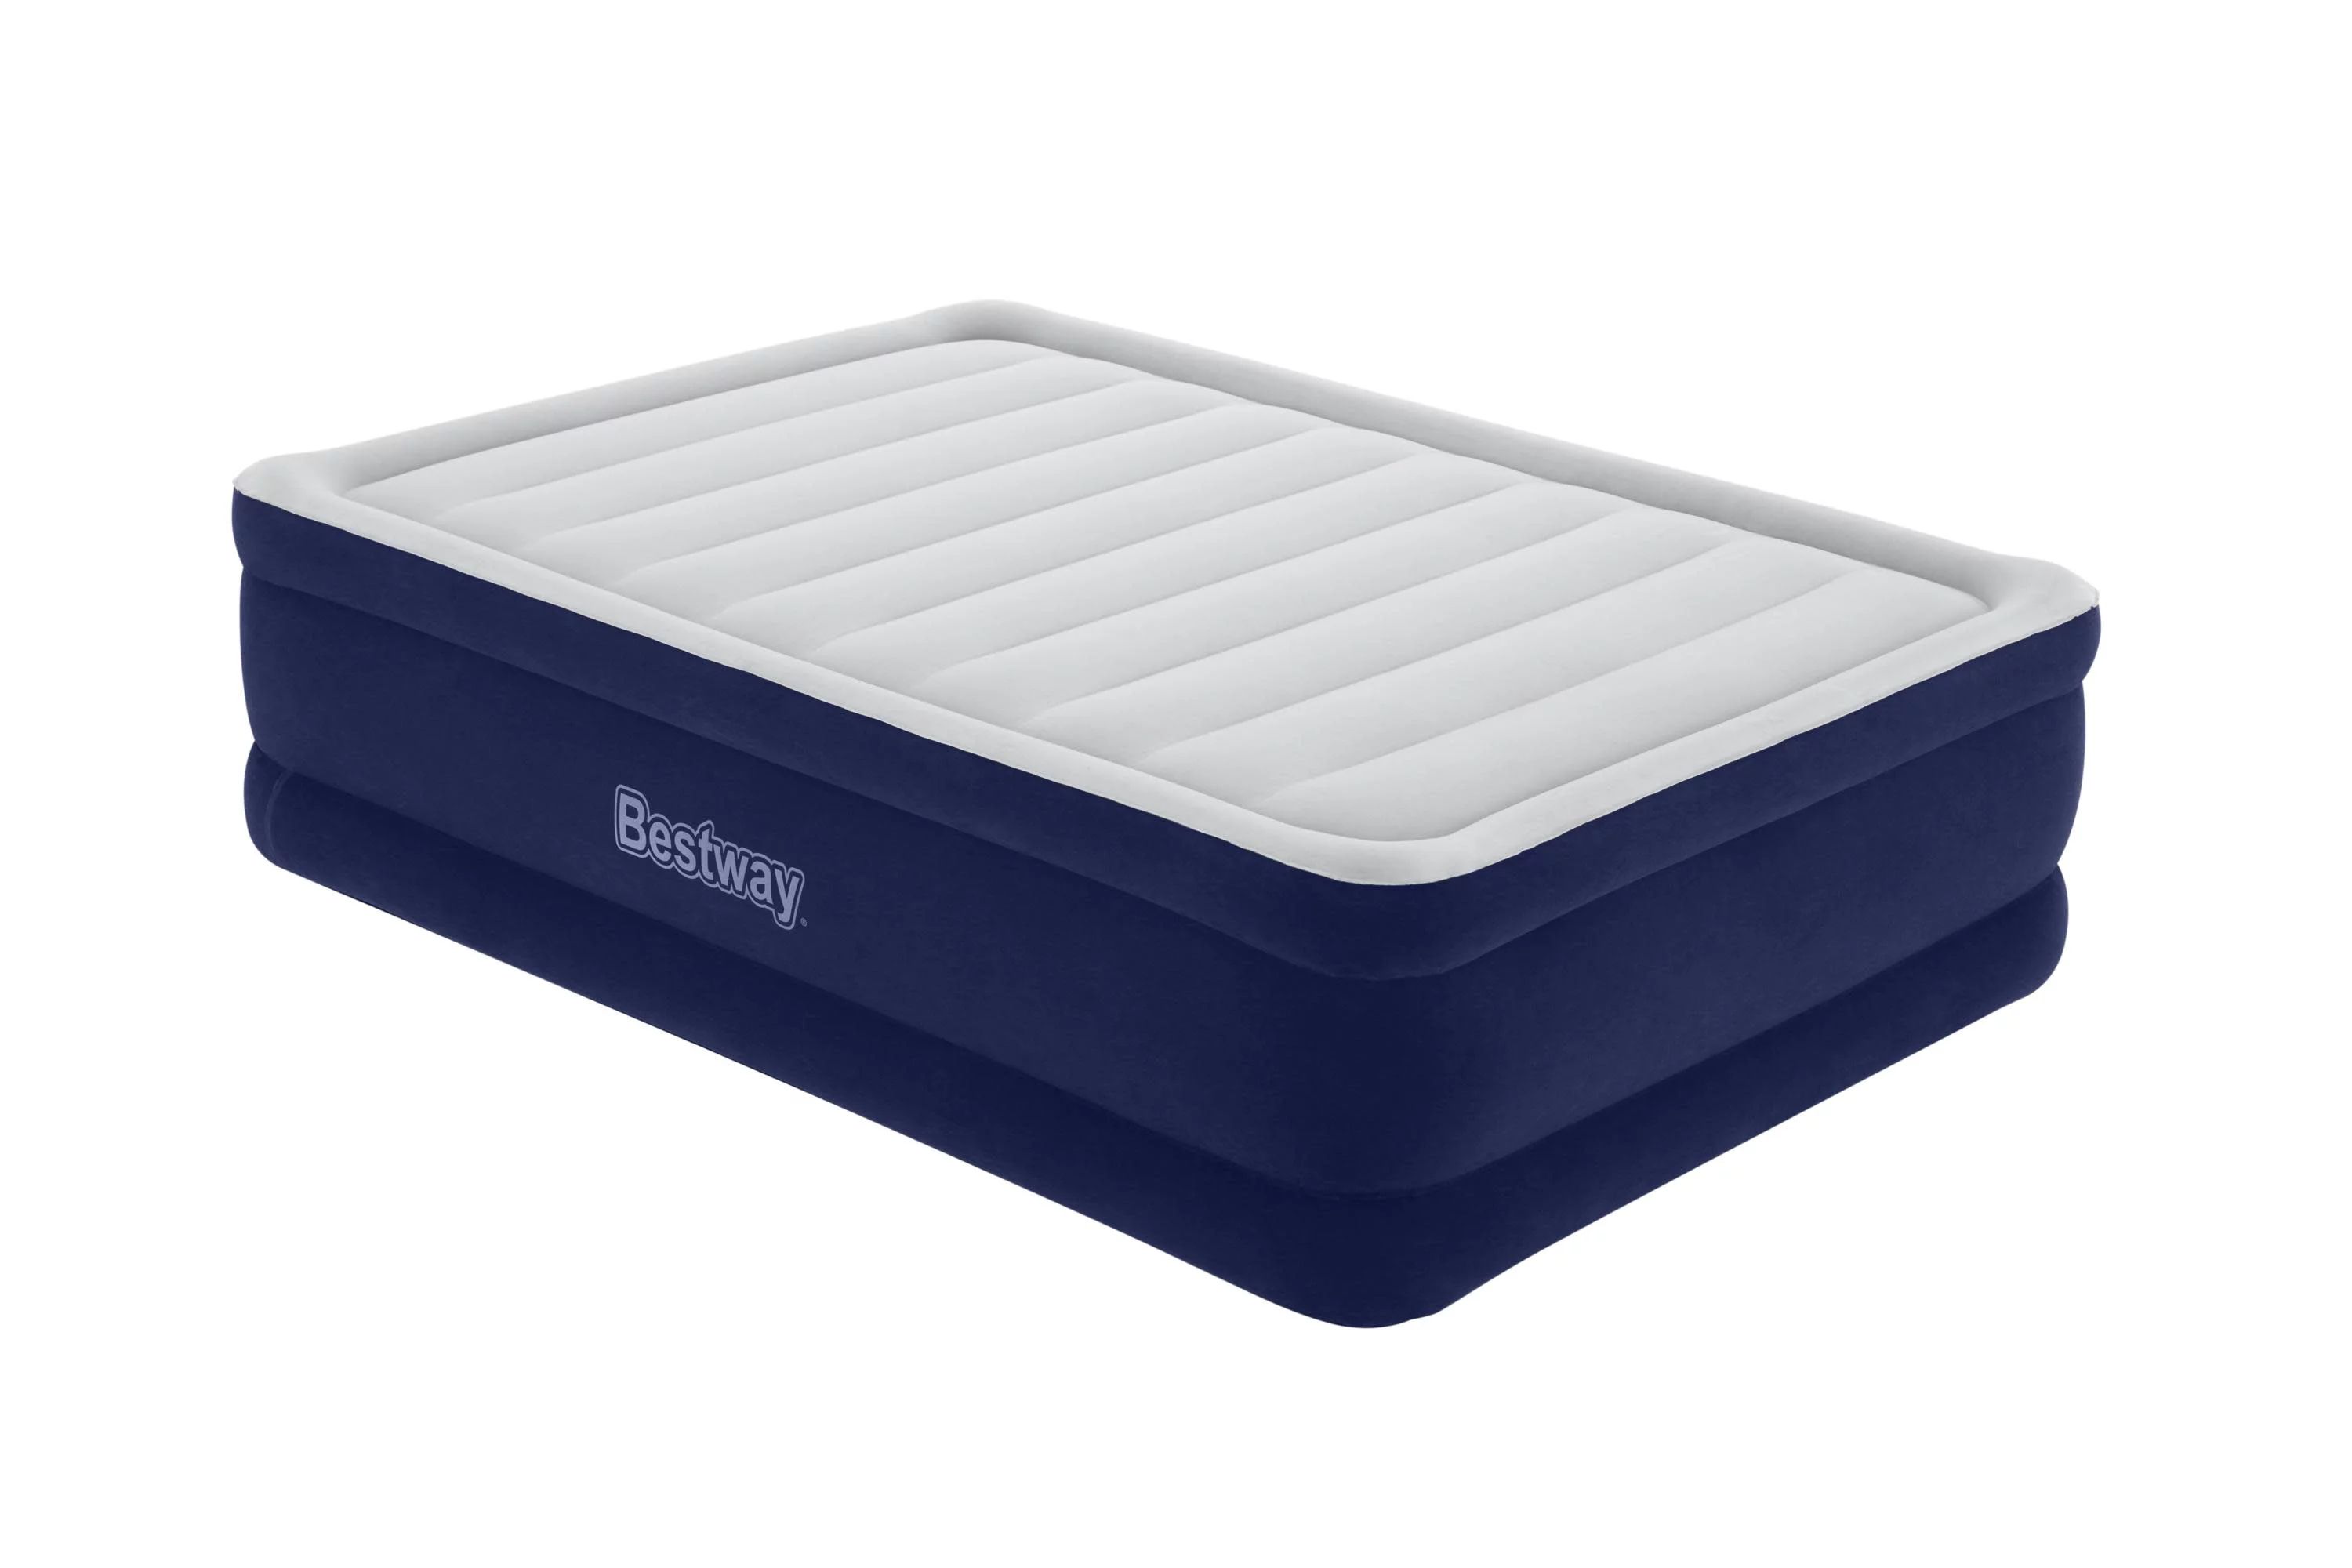 Bestway Tritech™ Air Mattress Queen 22" with Built-in AC Pump and Antimicrobial Coating - Walma... | Walmart (US)